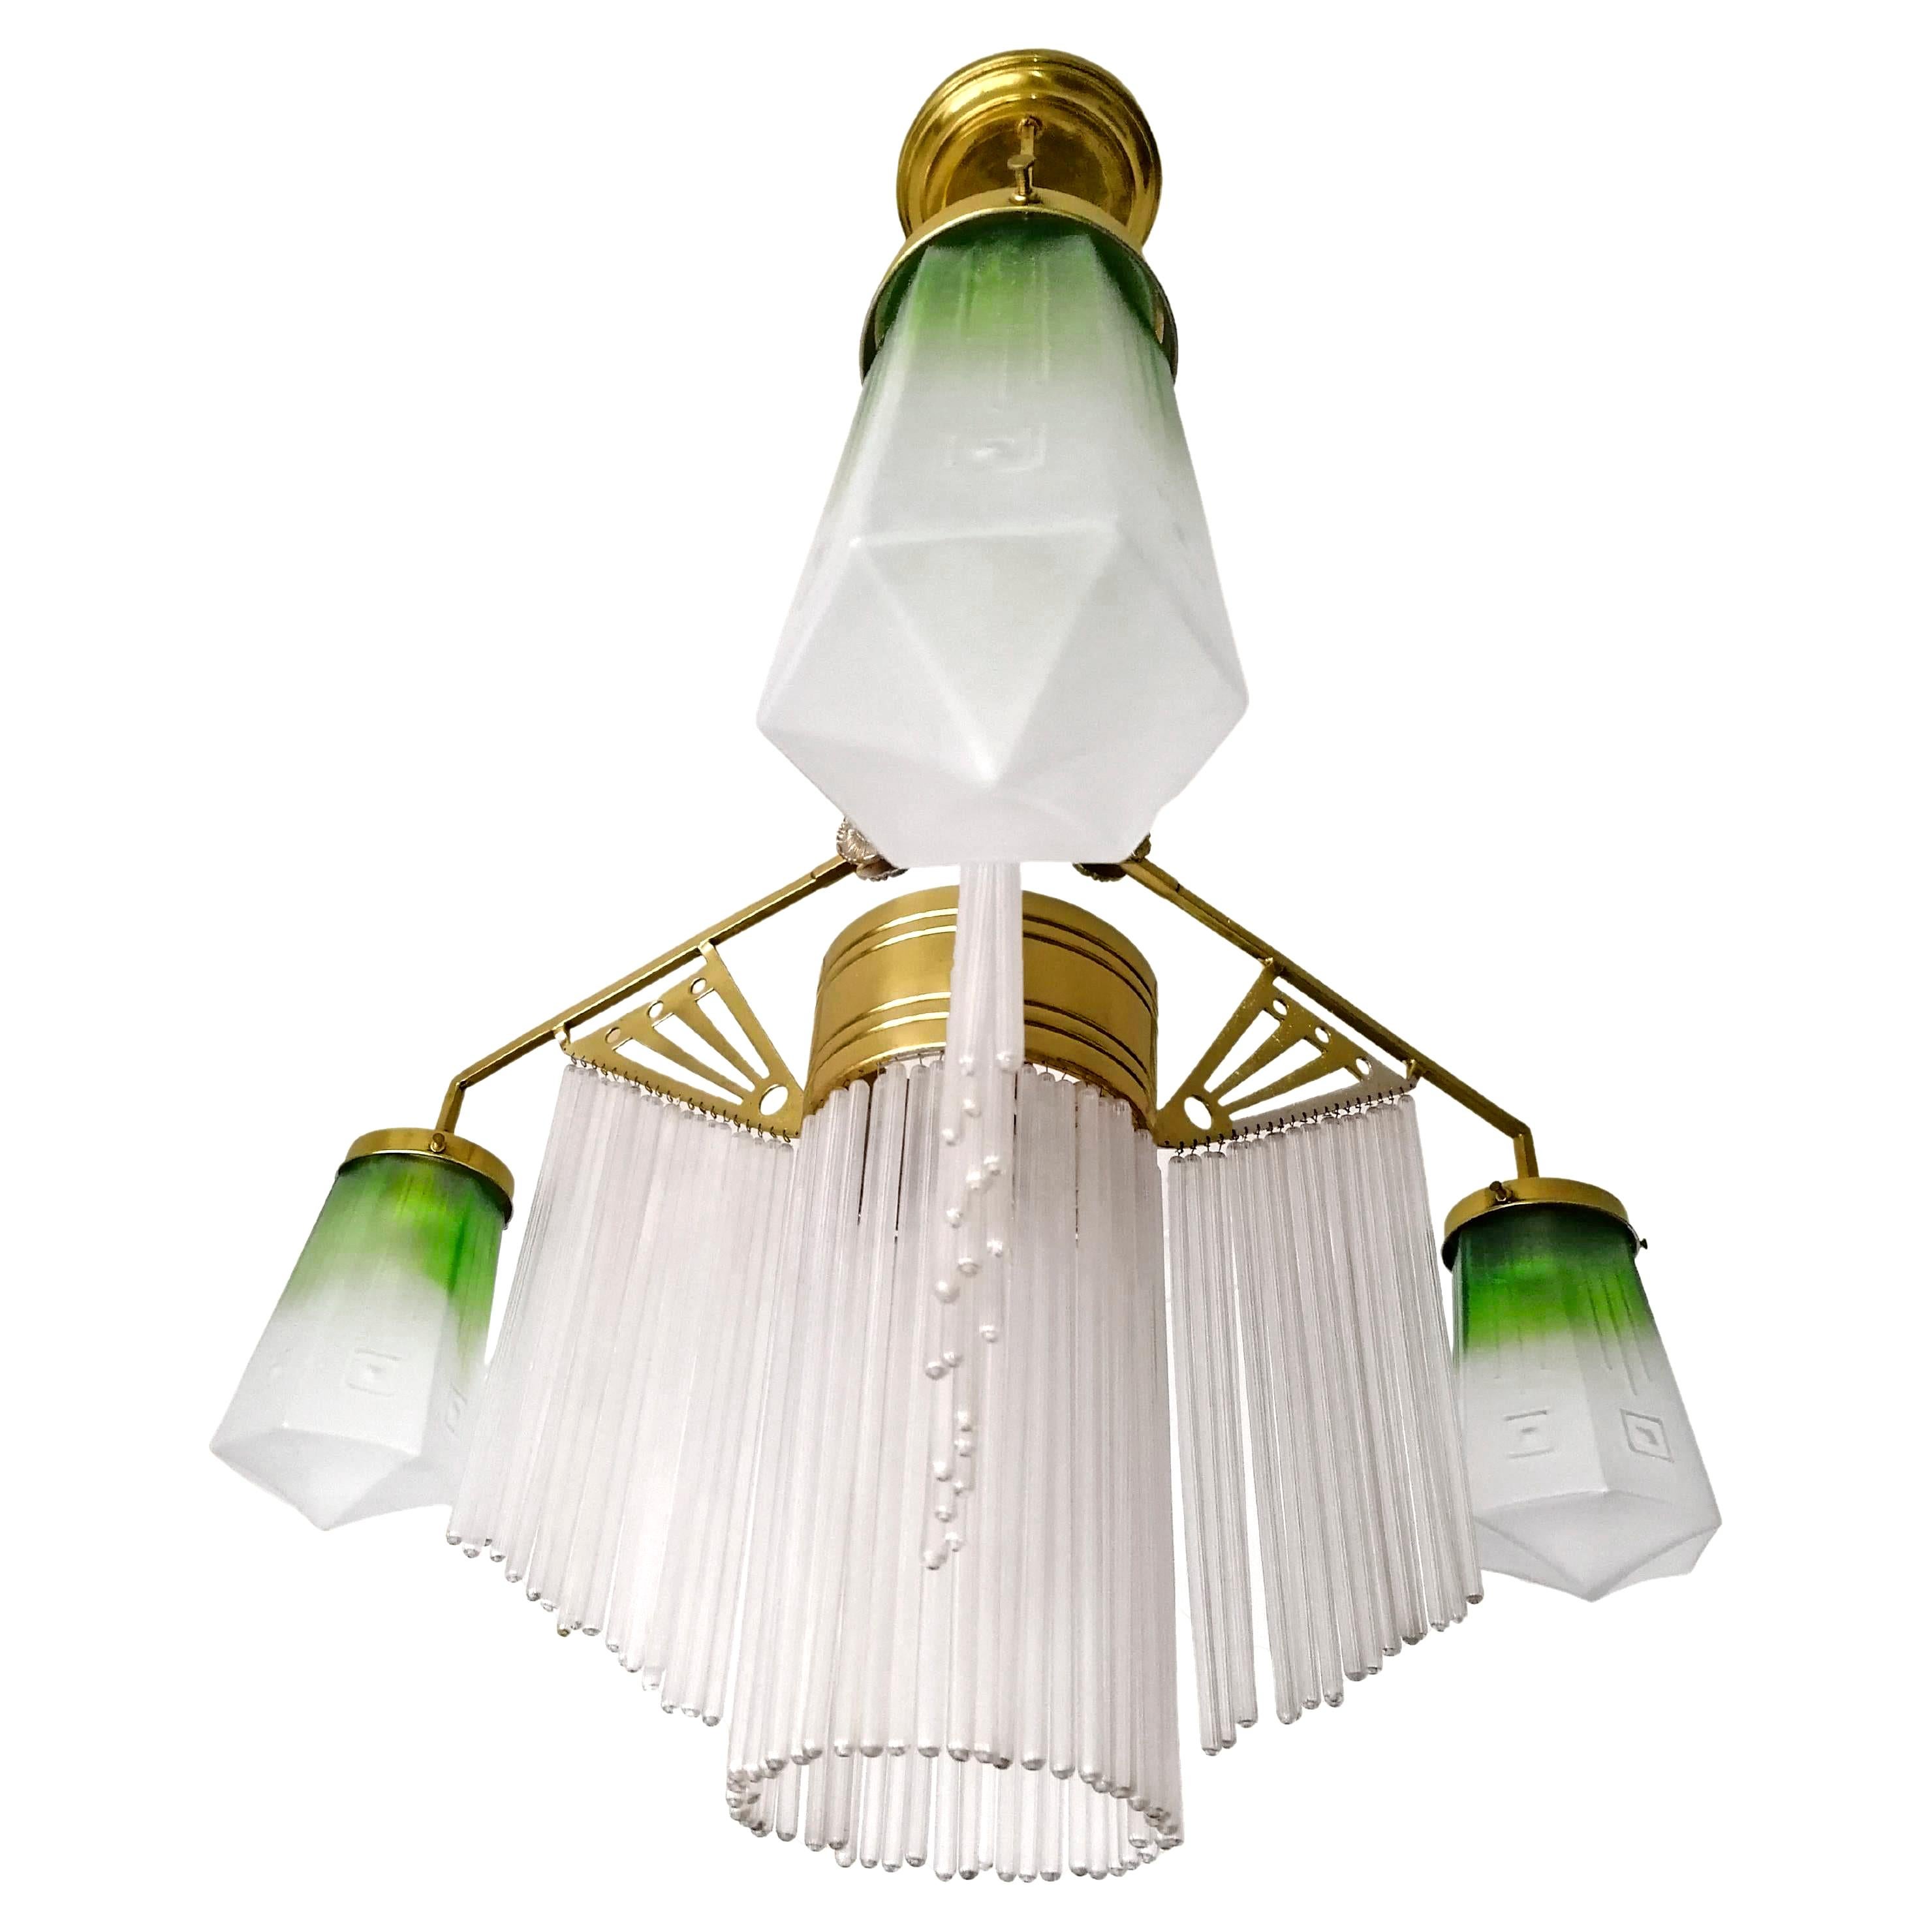 French Art Deco Skyscraper Chandelier in Green Glass, Straws & Gilt Brass C1920 In Excellent Condition For Sale In Coimbra, PT